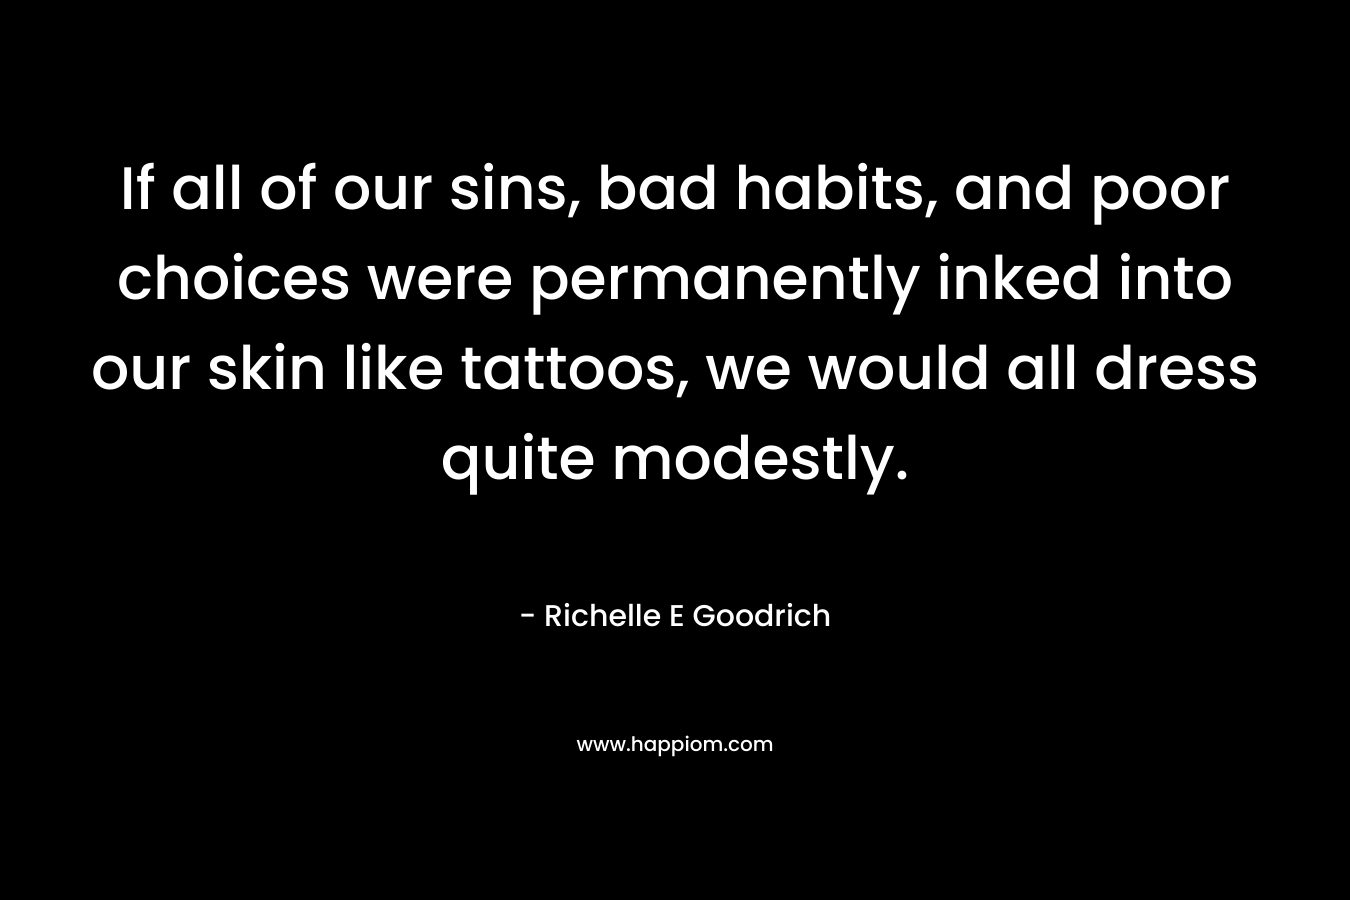 If all of our sins, bad habits, and poor choices were permanently inked into our skin like tattoos, we would all dress quite modestly. – Richelle E Goodrich